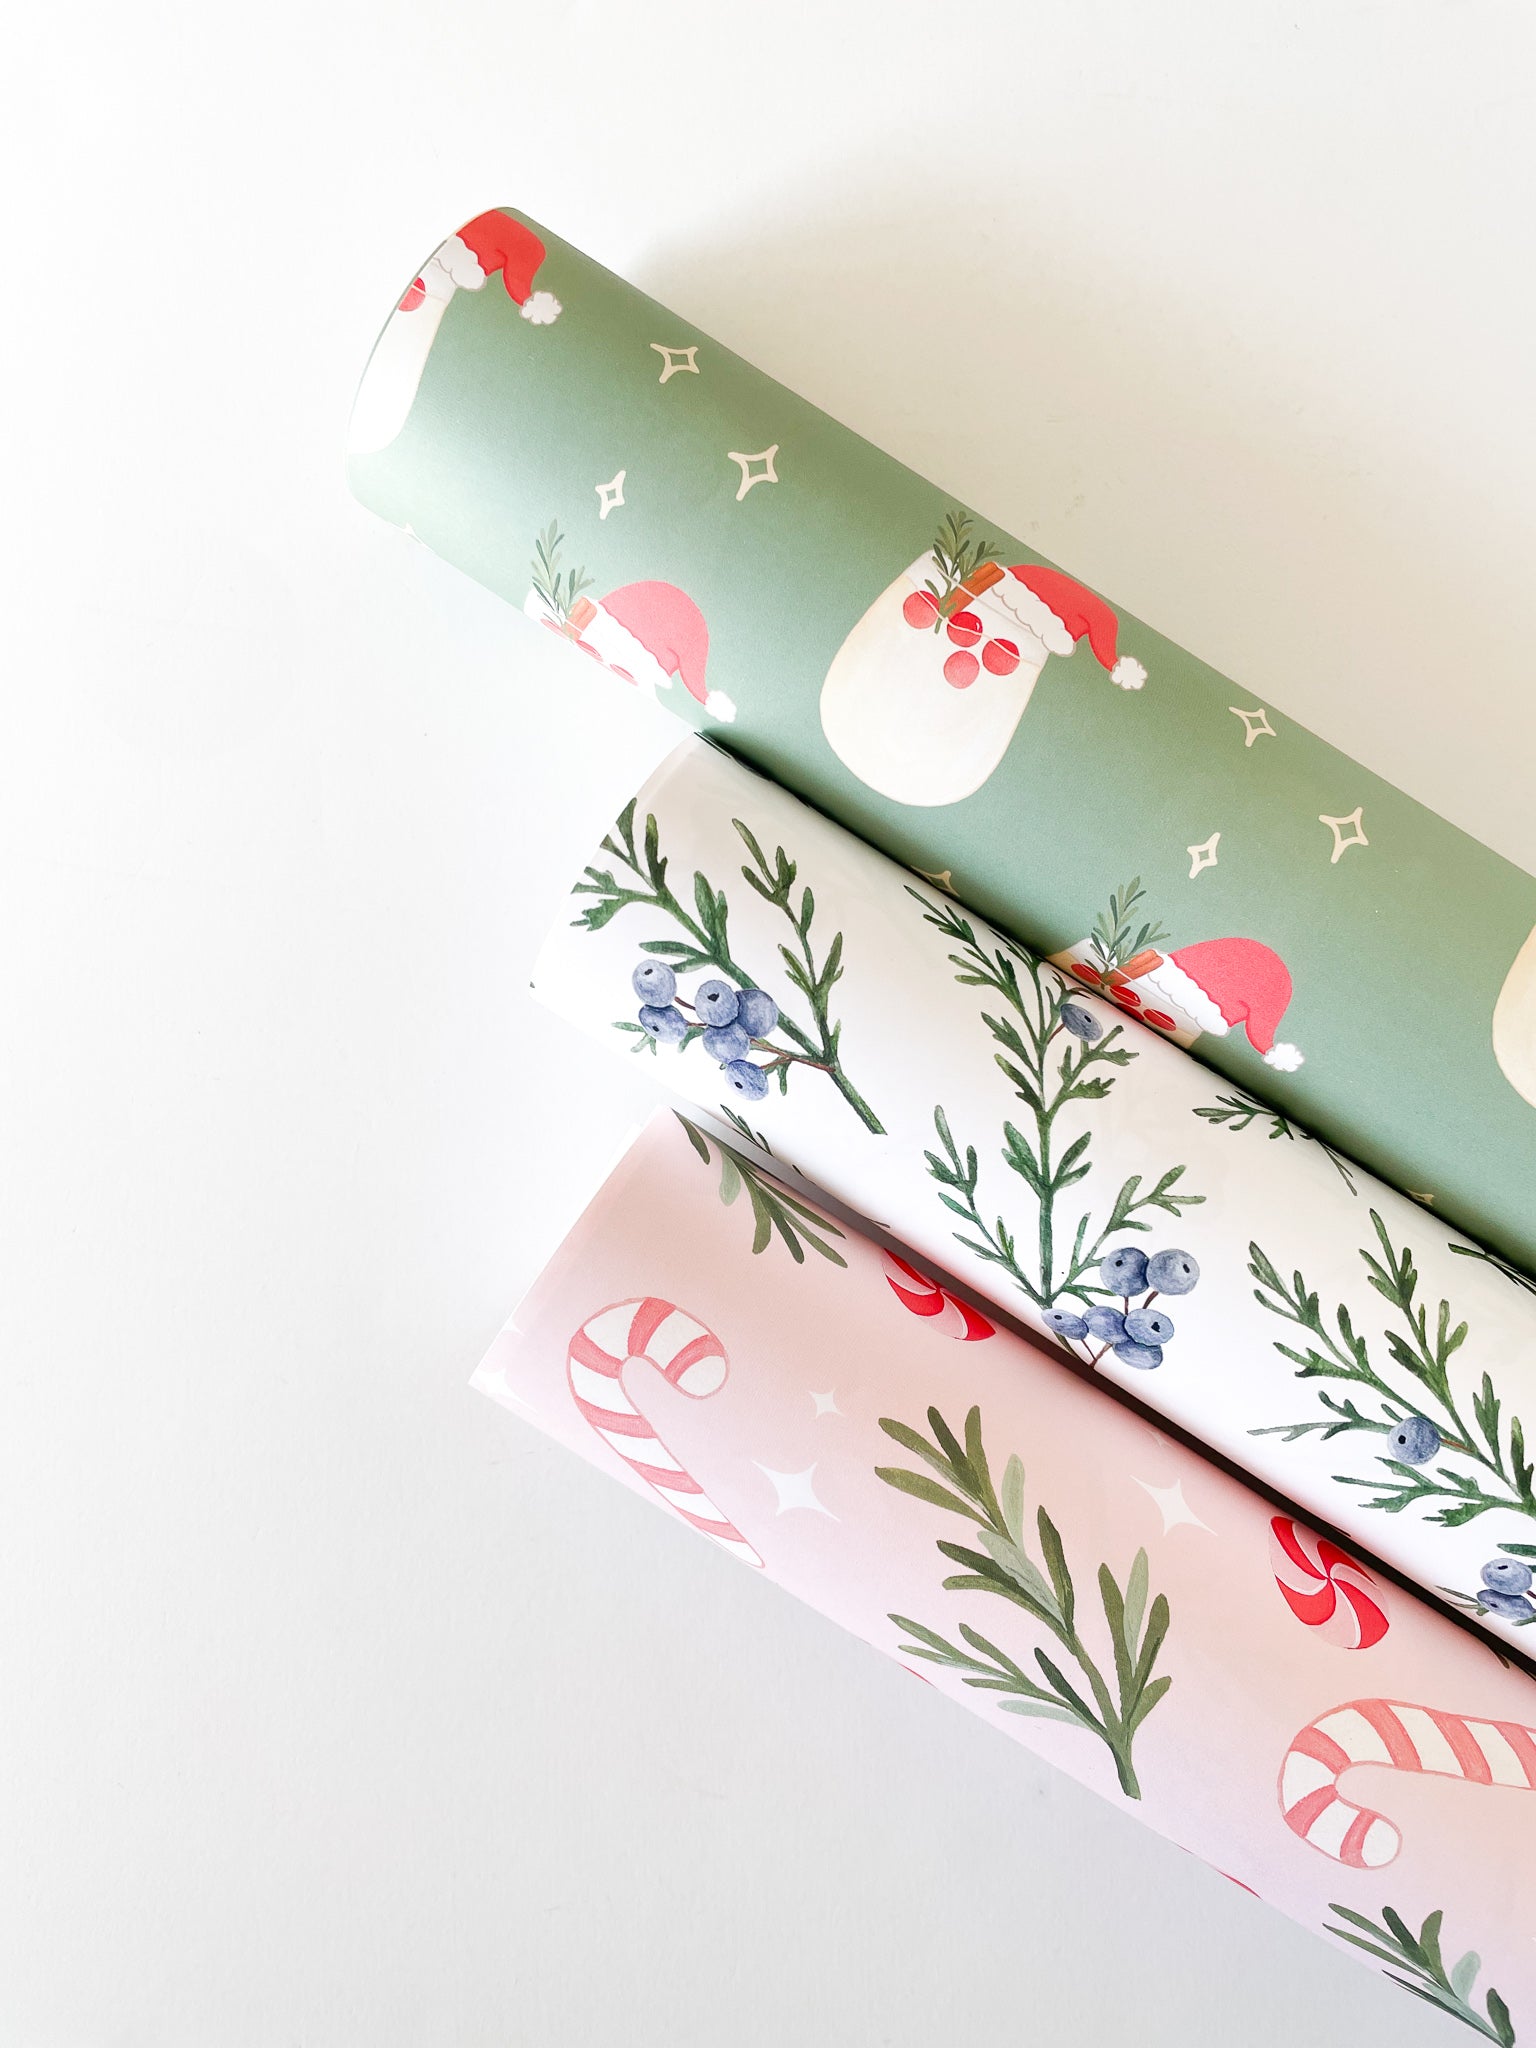 33ft + Heavy Duty Holiday Wrapping Paper for Sale in Millbrae, CA